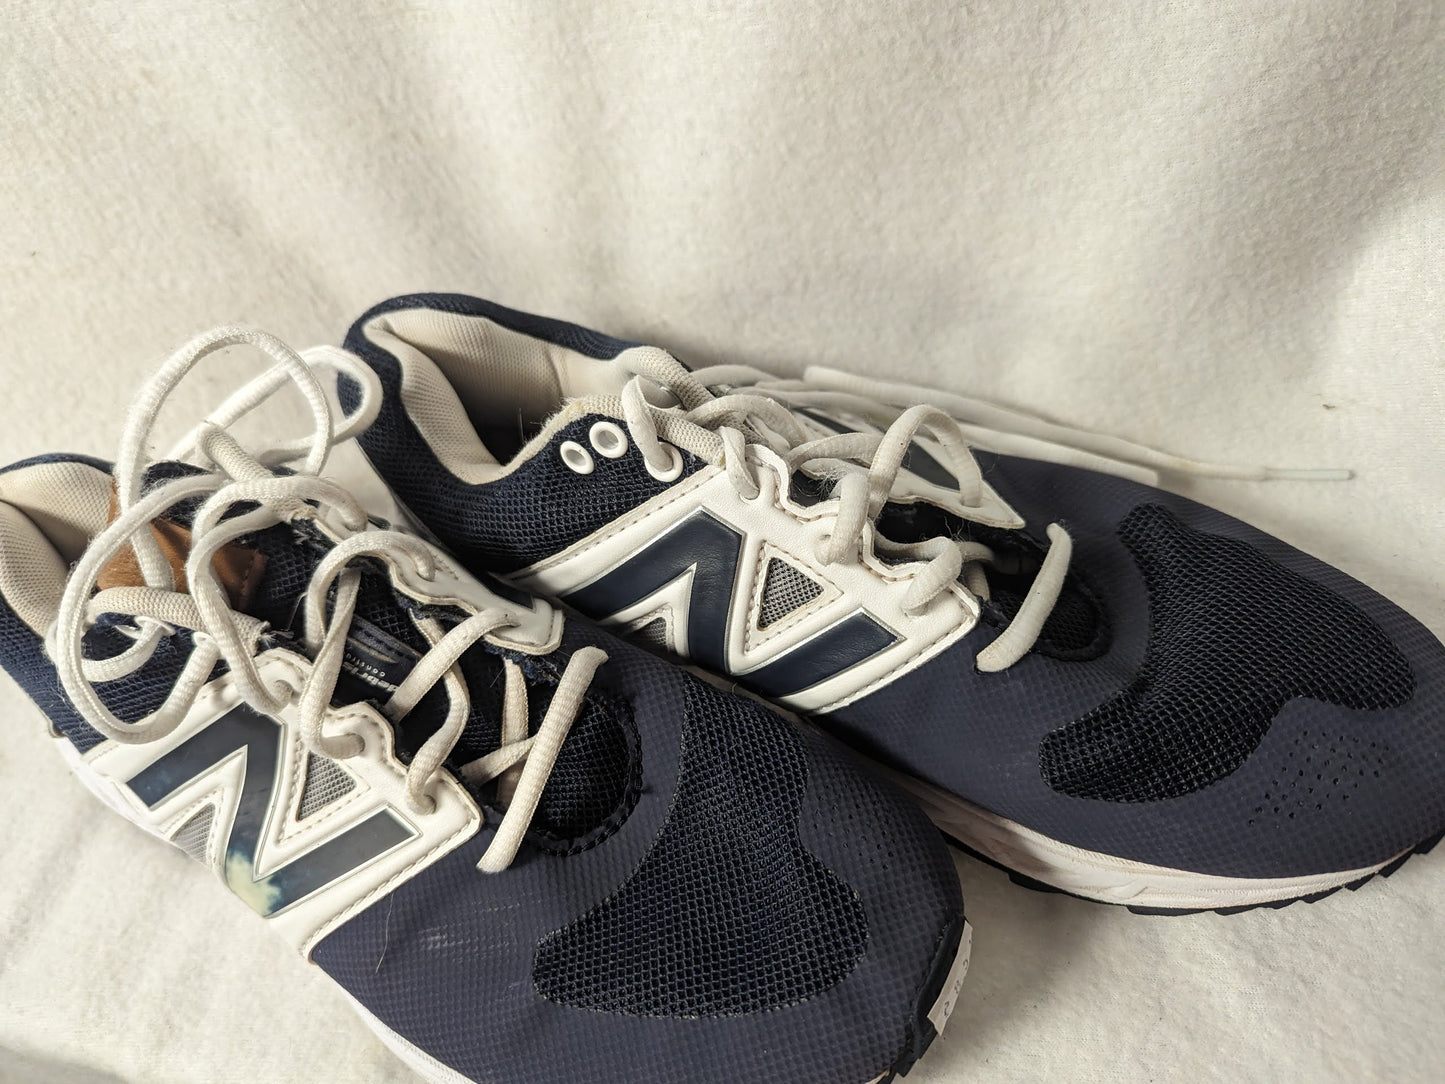 New Balance Athletic Shoes Size ?8.5? Color Blue Condition Used